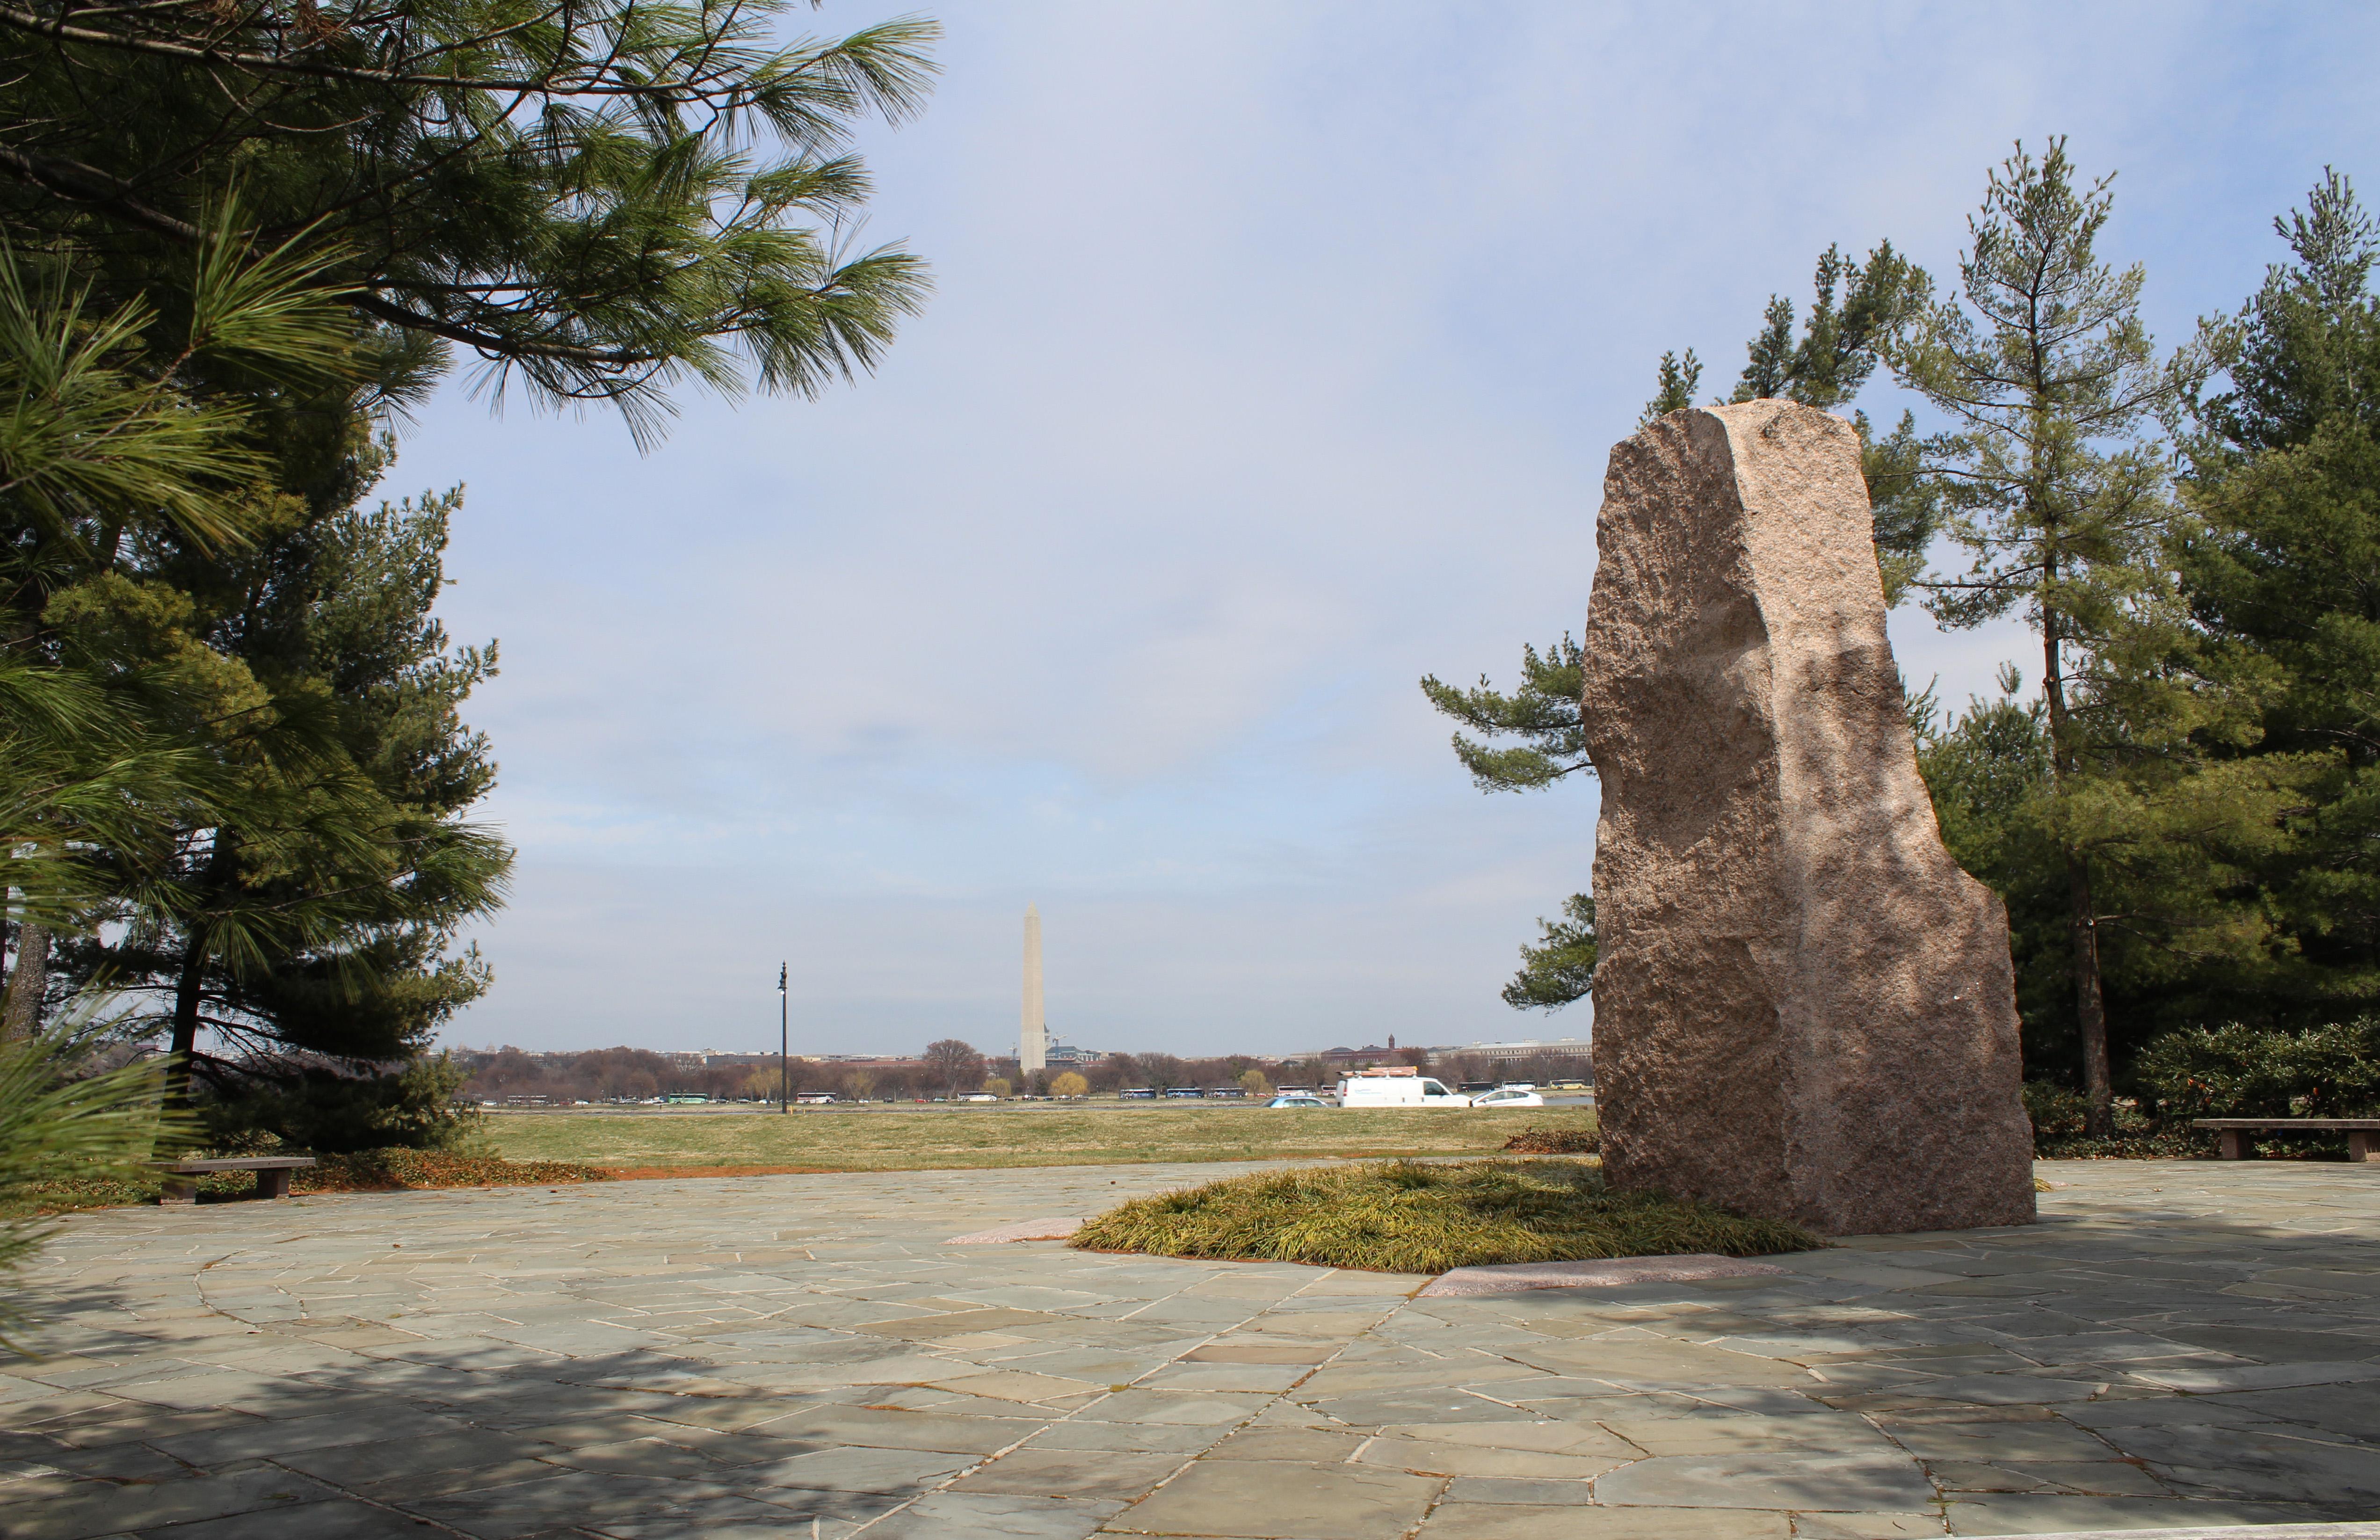 A stone memorial with the river and DC skyline in the distance.